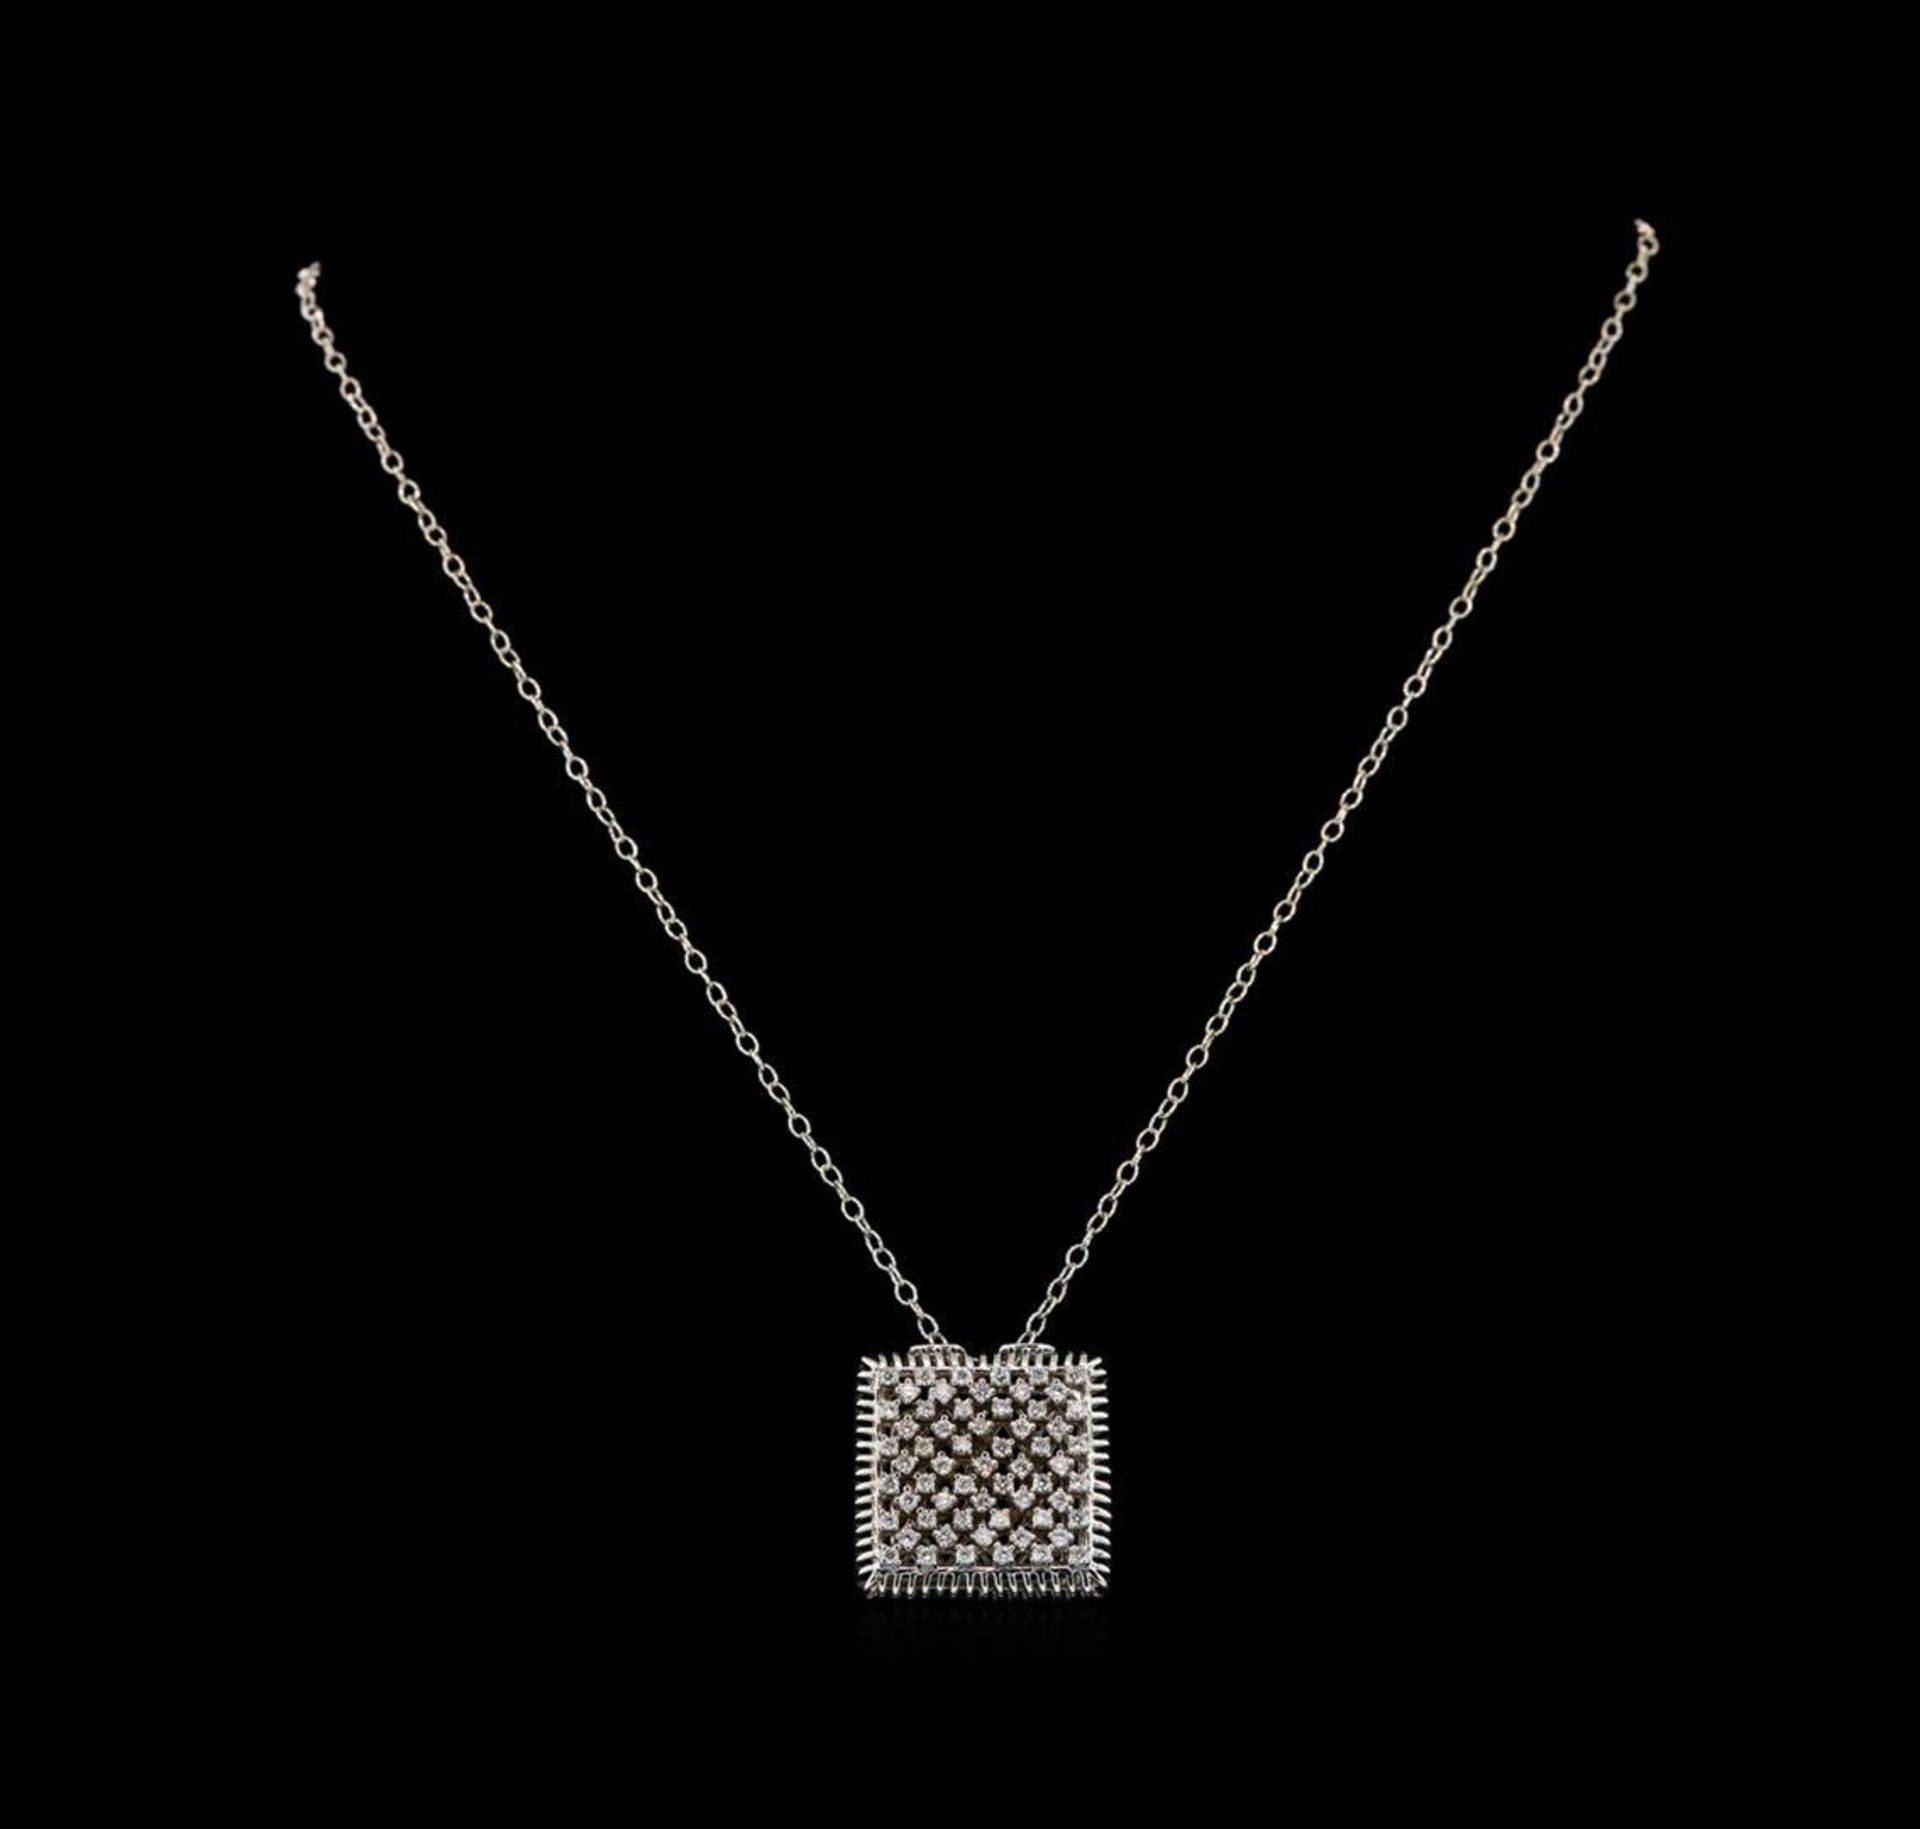 0.85 ctw Diamond Pendant With Chain - 14KT White Gold - Image 2 of 3